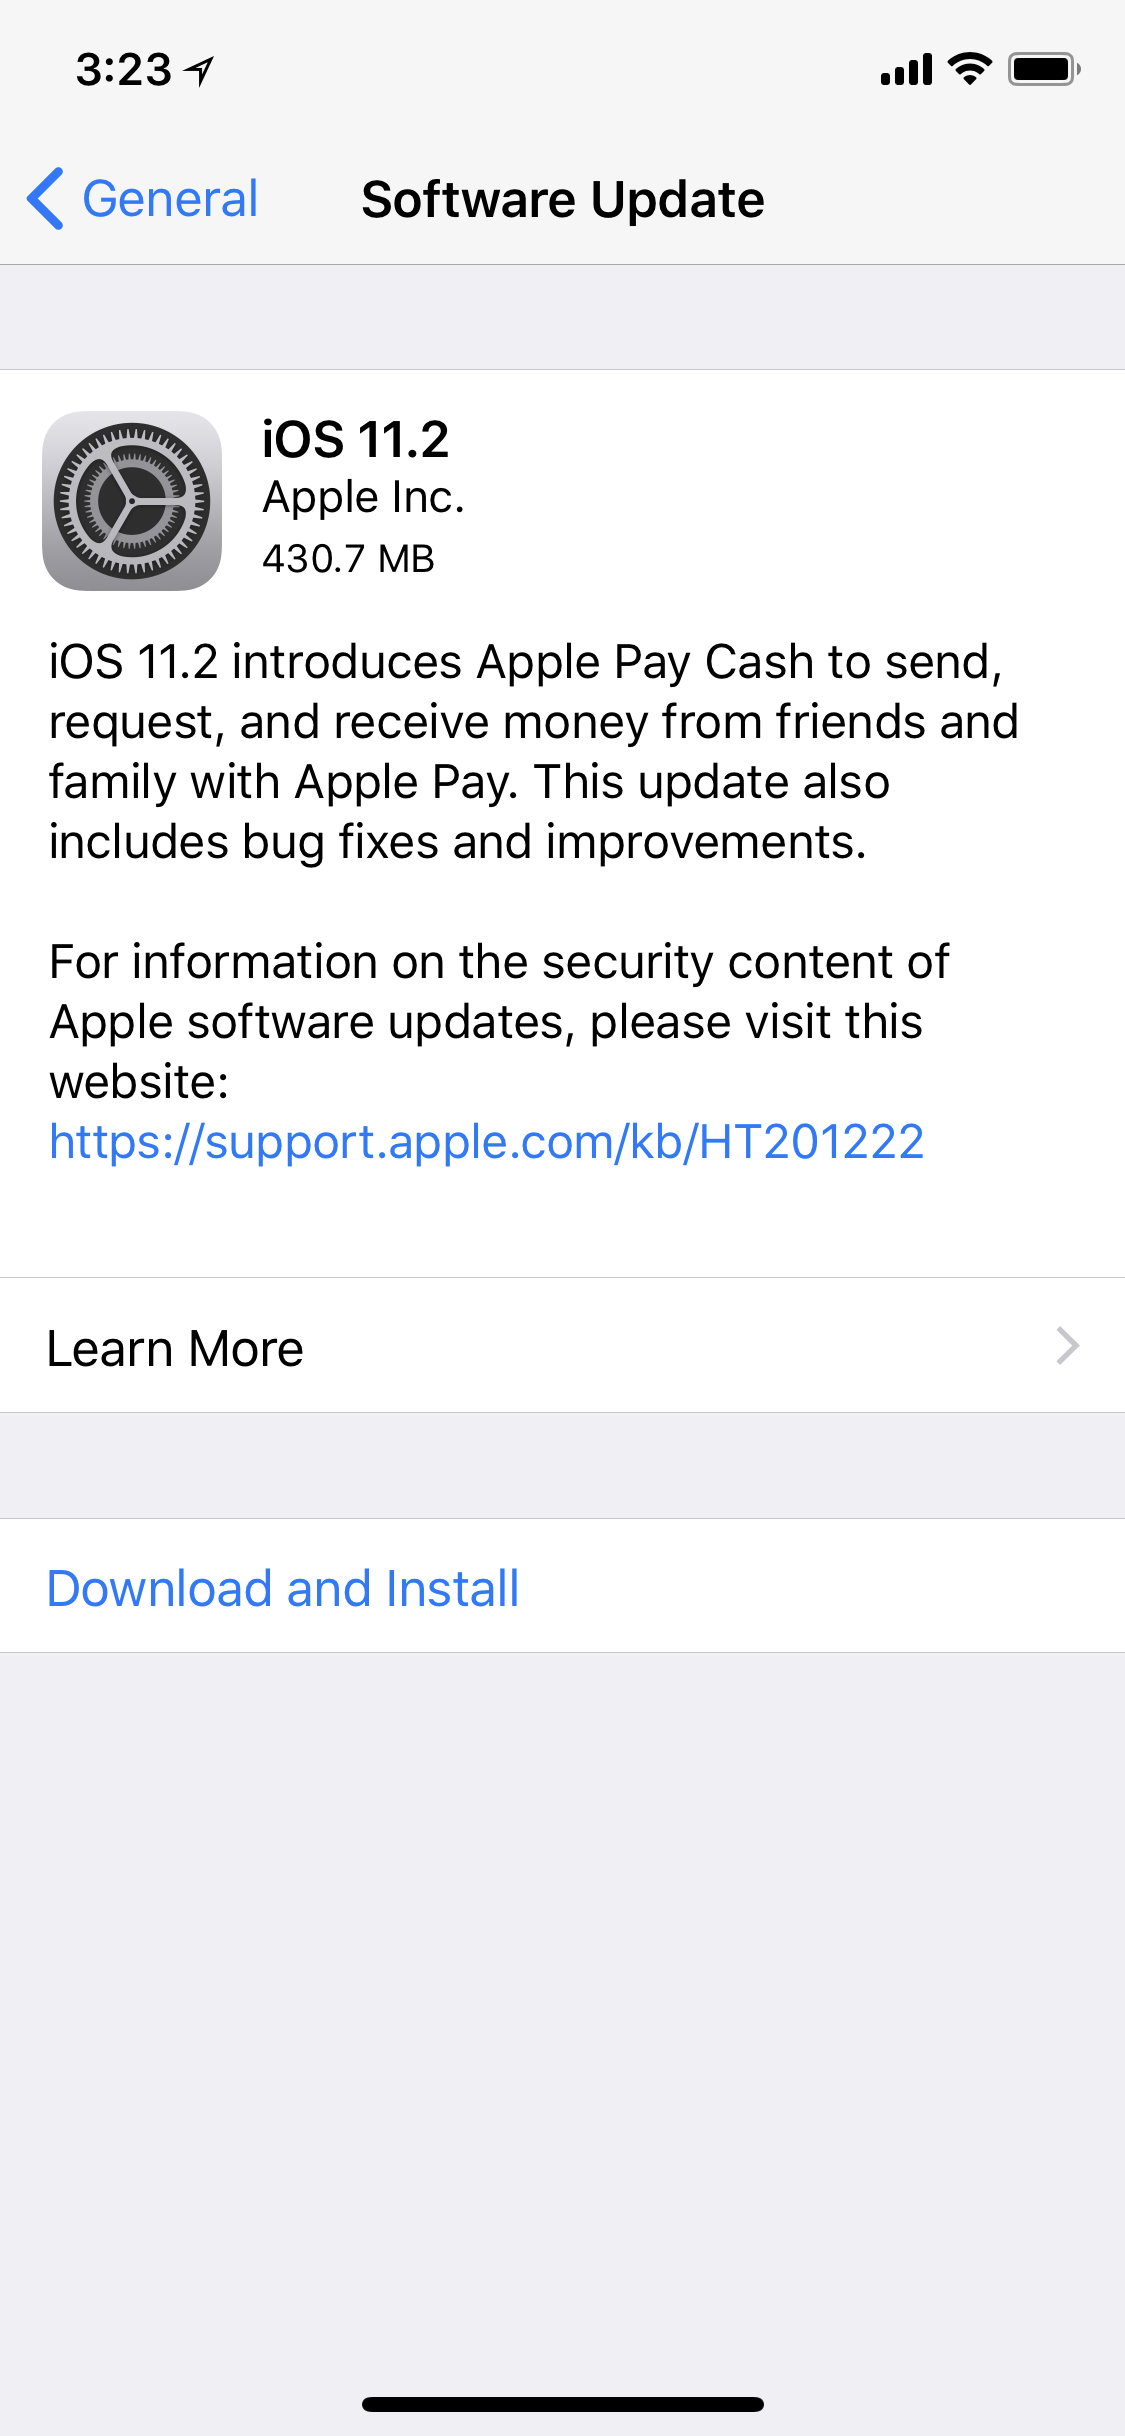 Apple Releases iOS 11.2 With Apple Pay Cash, Faster Wireless Charging, Fix for December 2nd Date Bug